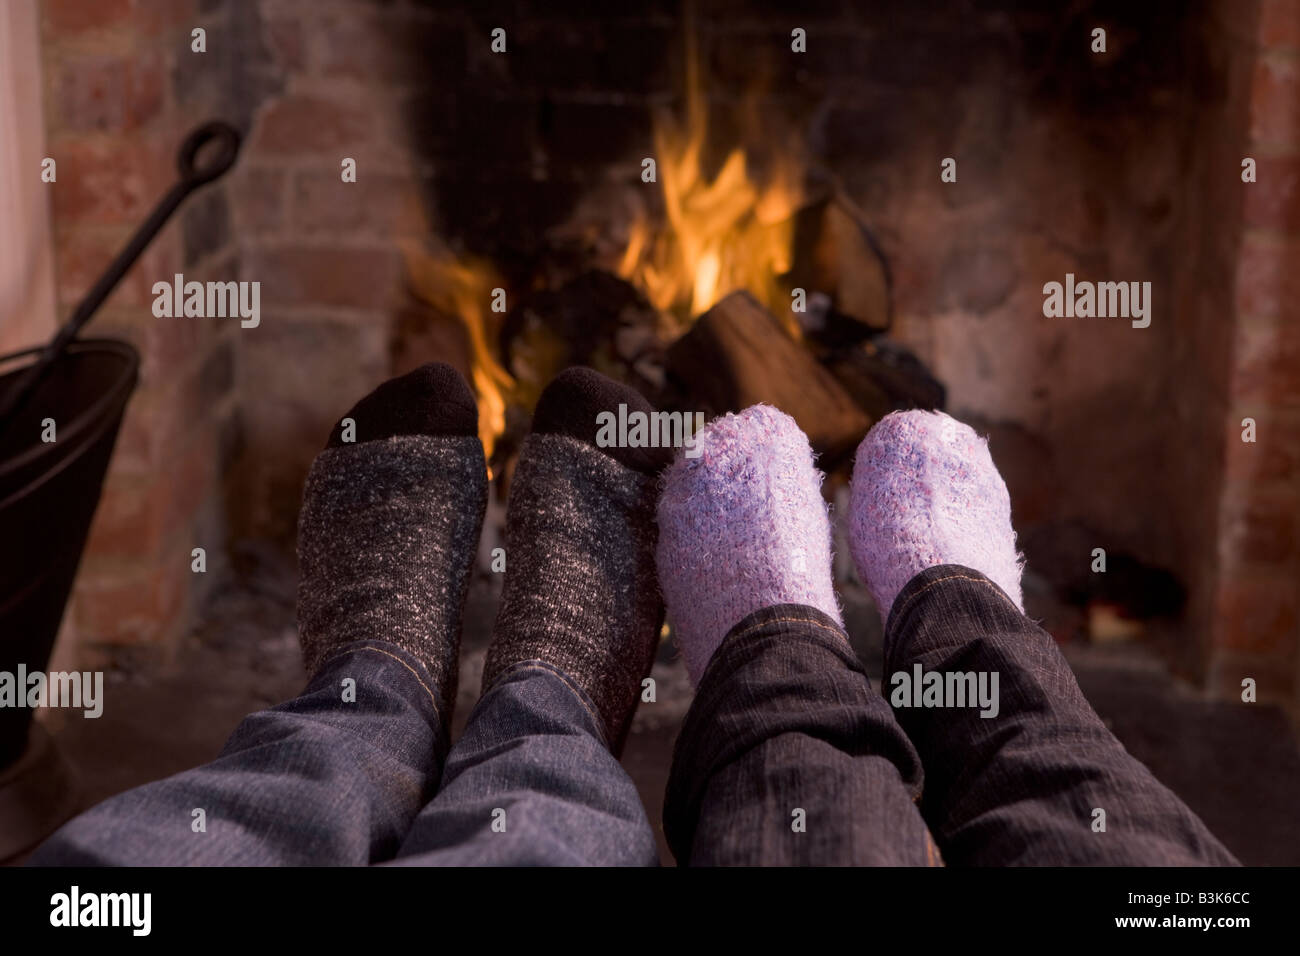 Couple's feet warming at a fireplace Stock Photo